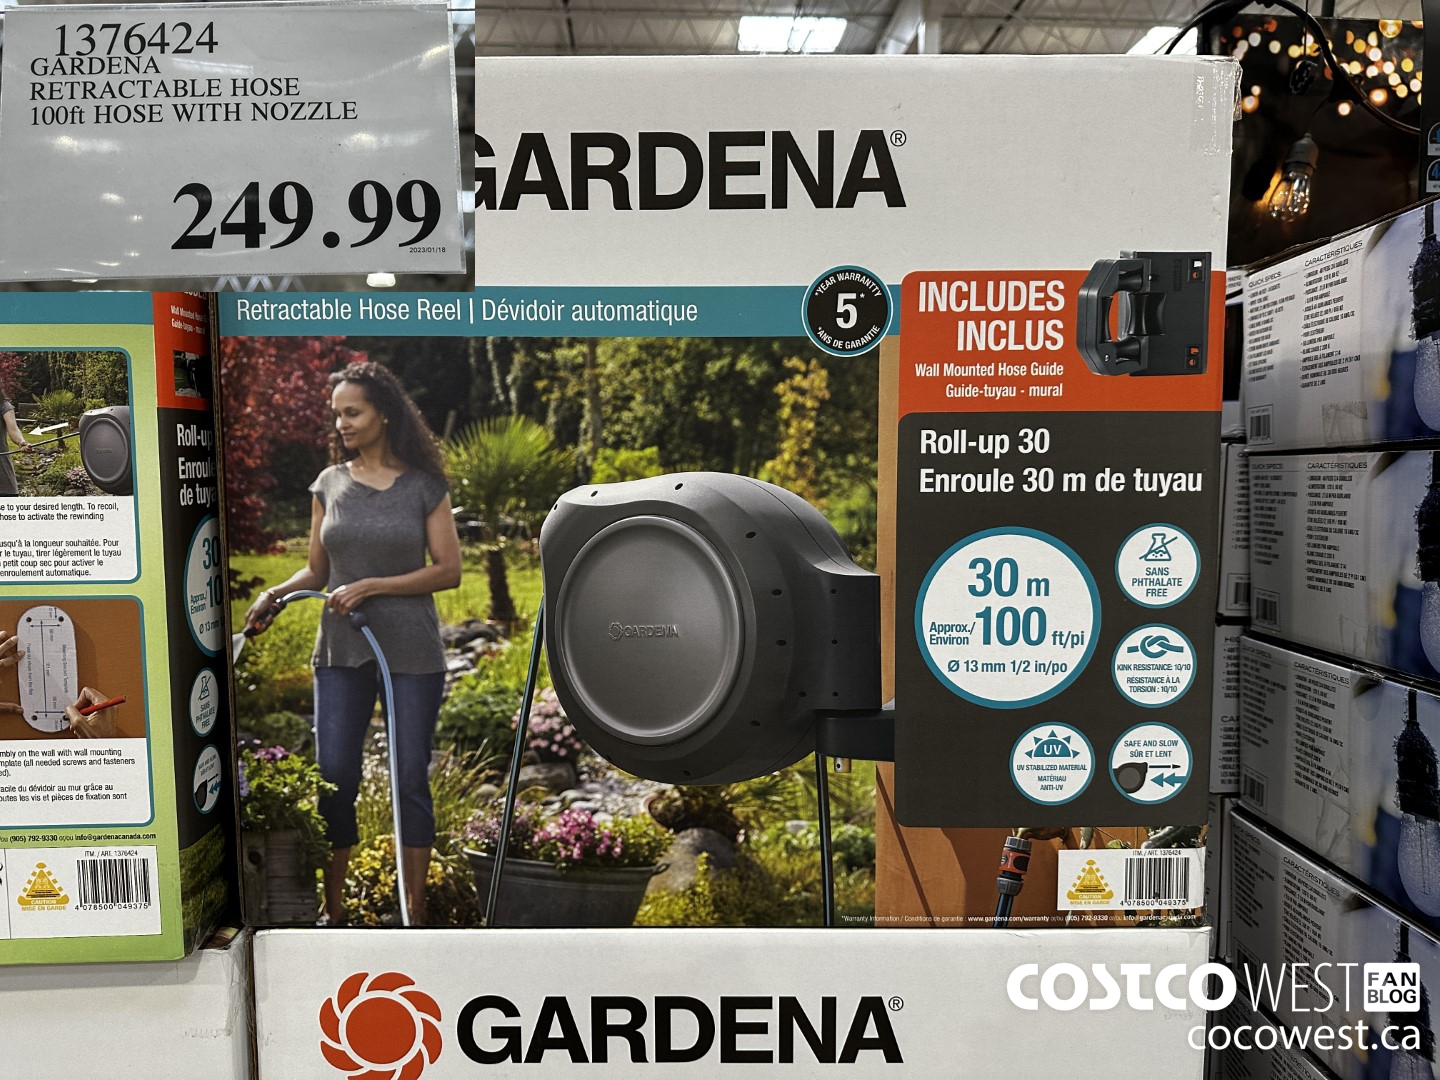 Weekend Update! – Costco Sale Items for Jan 20-22, 2023 for BC, AB